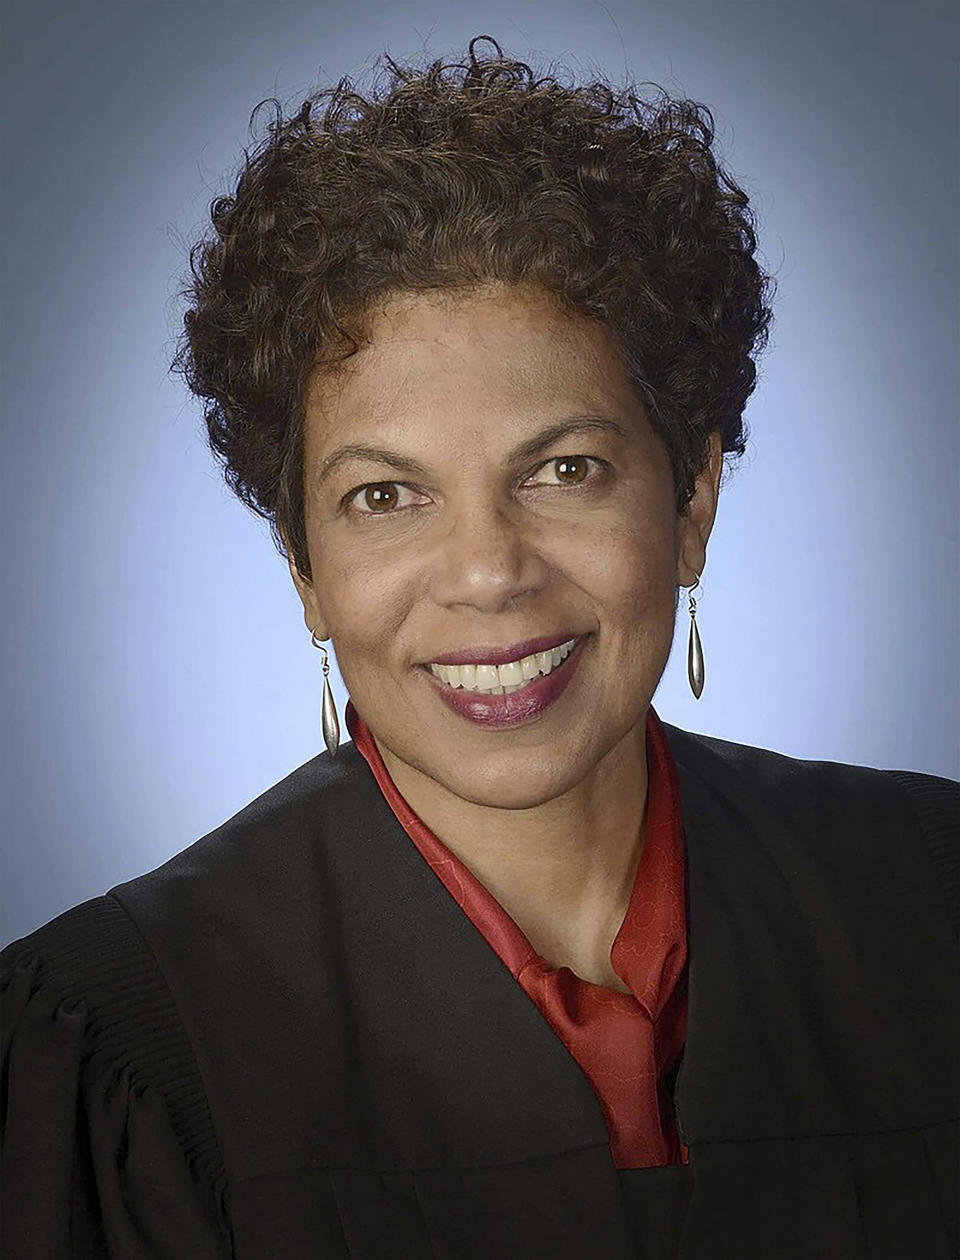 FILE - This undated photo provided by the Administrative Office of the U.S. Courts, shows U.S. District Judge Tanya Chutkan. Federal prosecutors and lawyers for Donald Trump will argue in court Monday, Oct. 16, over a proposed gag order aimed at reining in the former president's diatribes against likely witnesses and others in his 2020 election interference case in Washington.(Administrative Office of the U.S. Courts via AP, File)